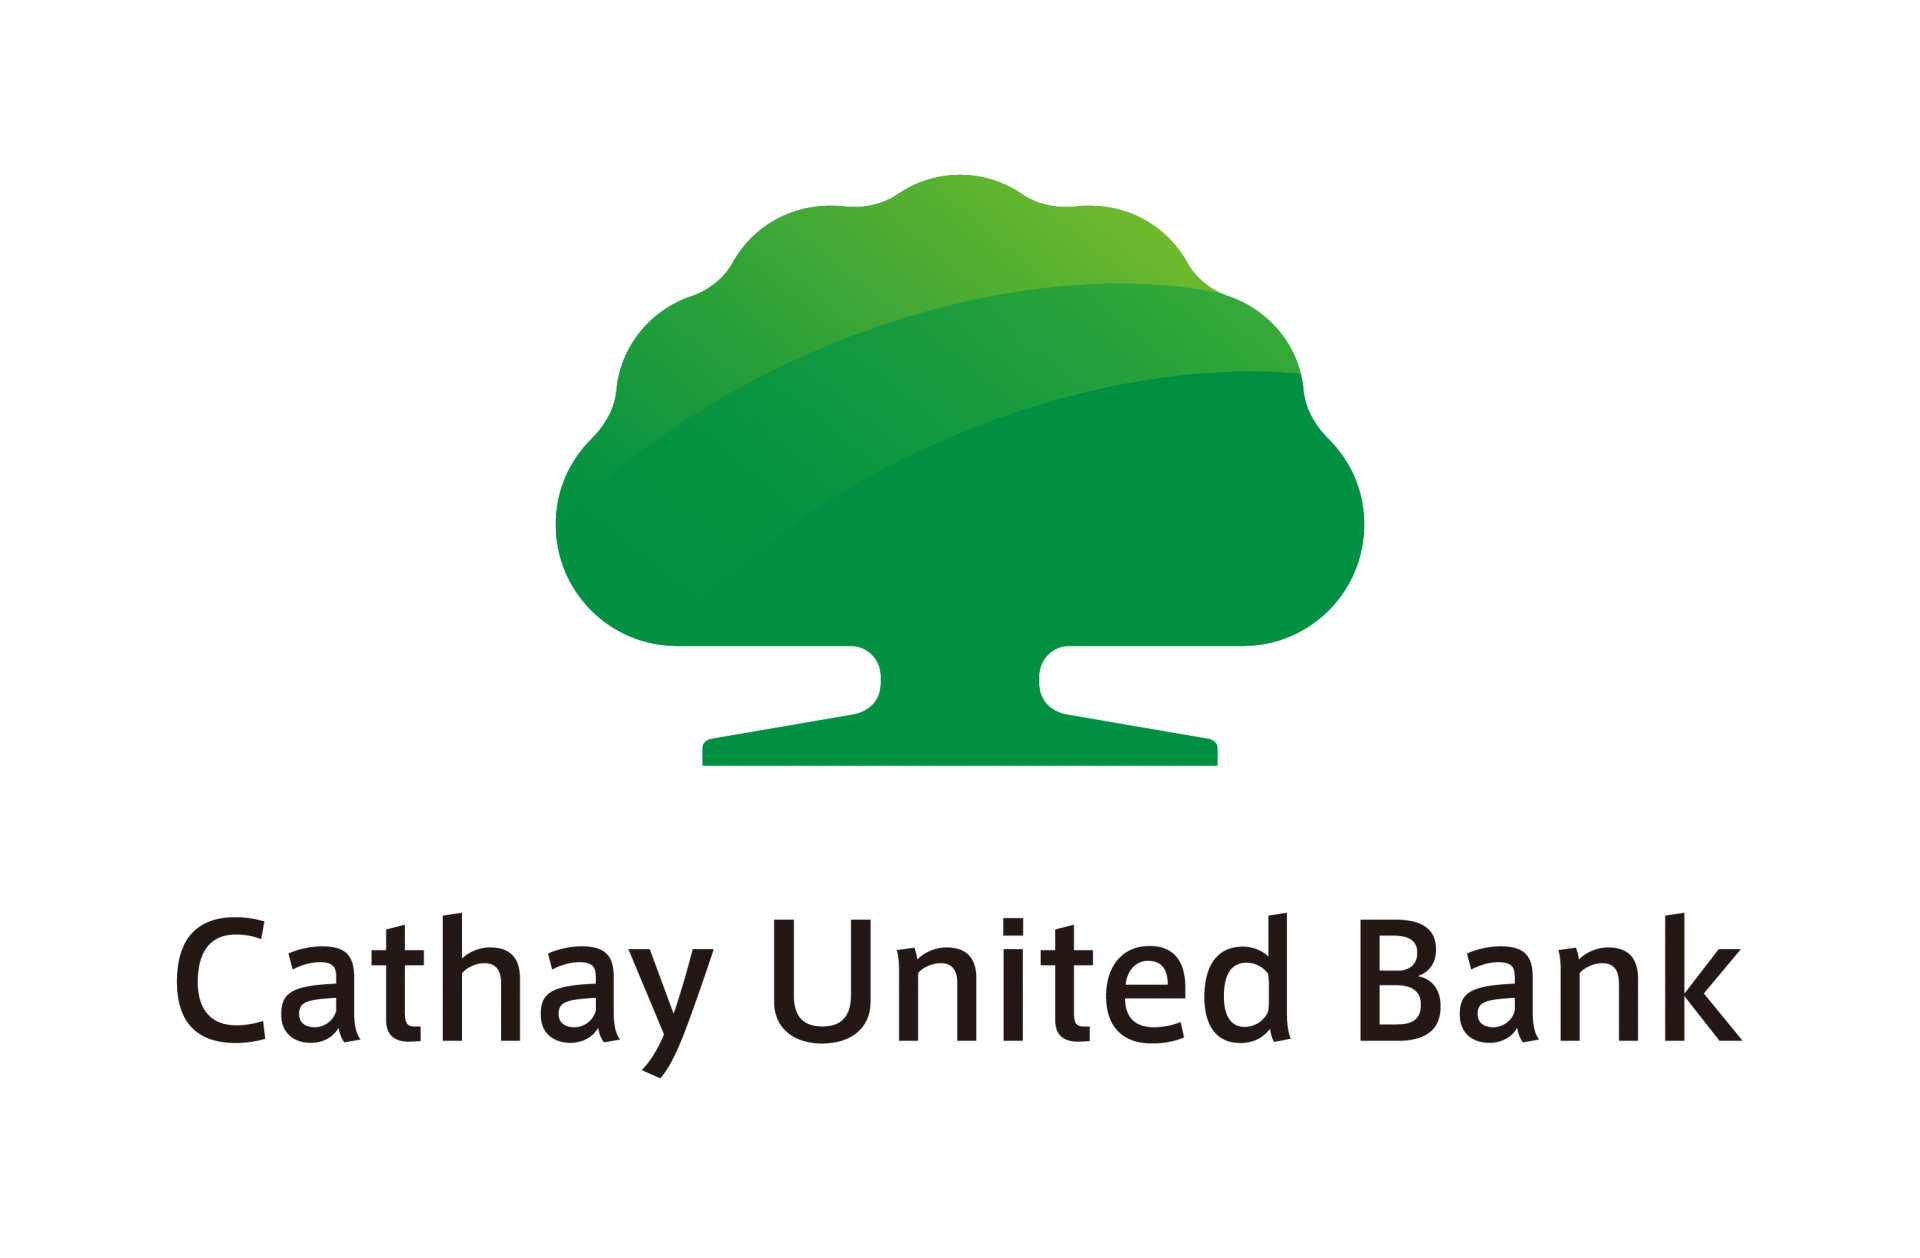 Taiwanese financial behemoth Cathay United Bank supports foreign investment in Vietnam